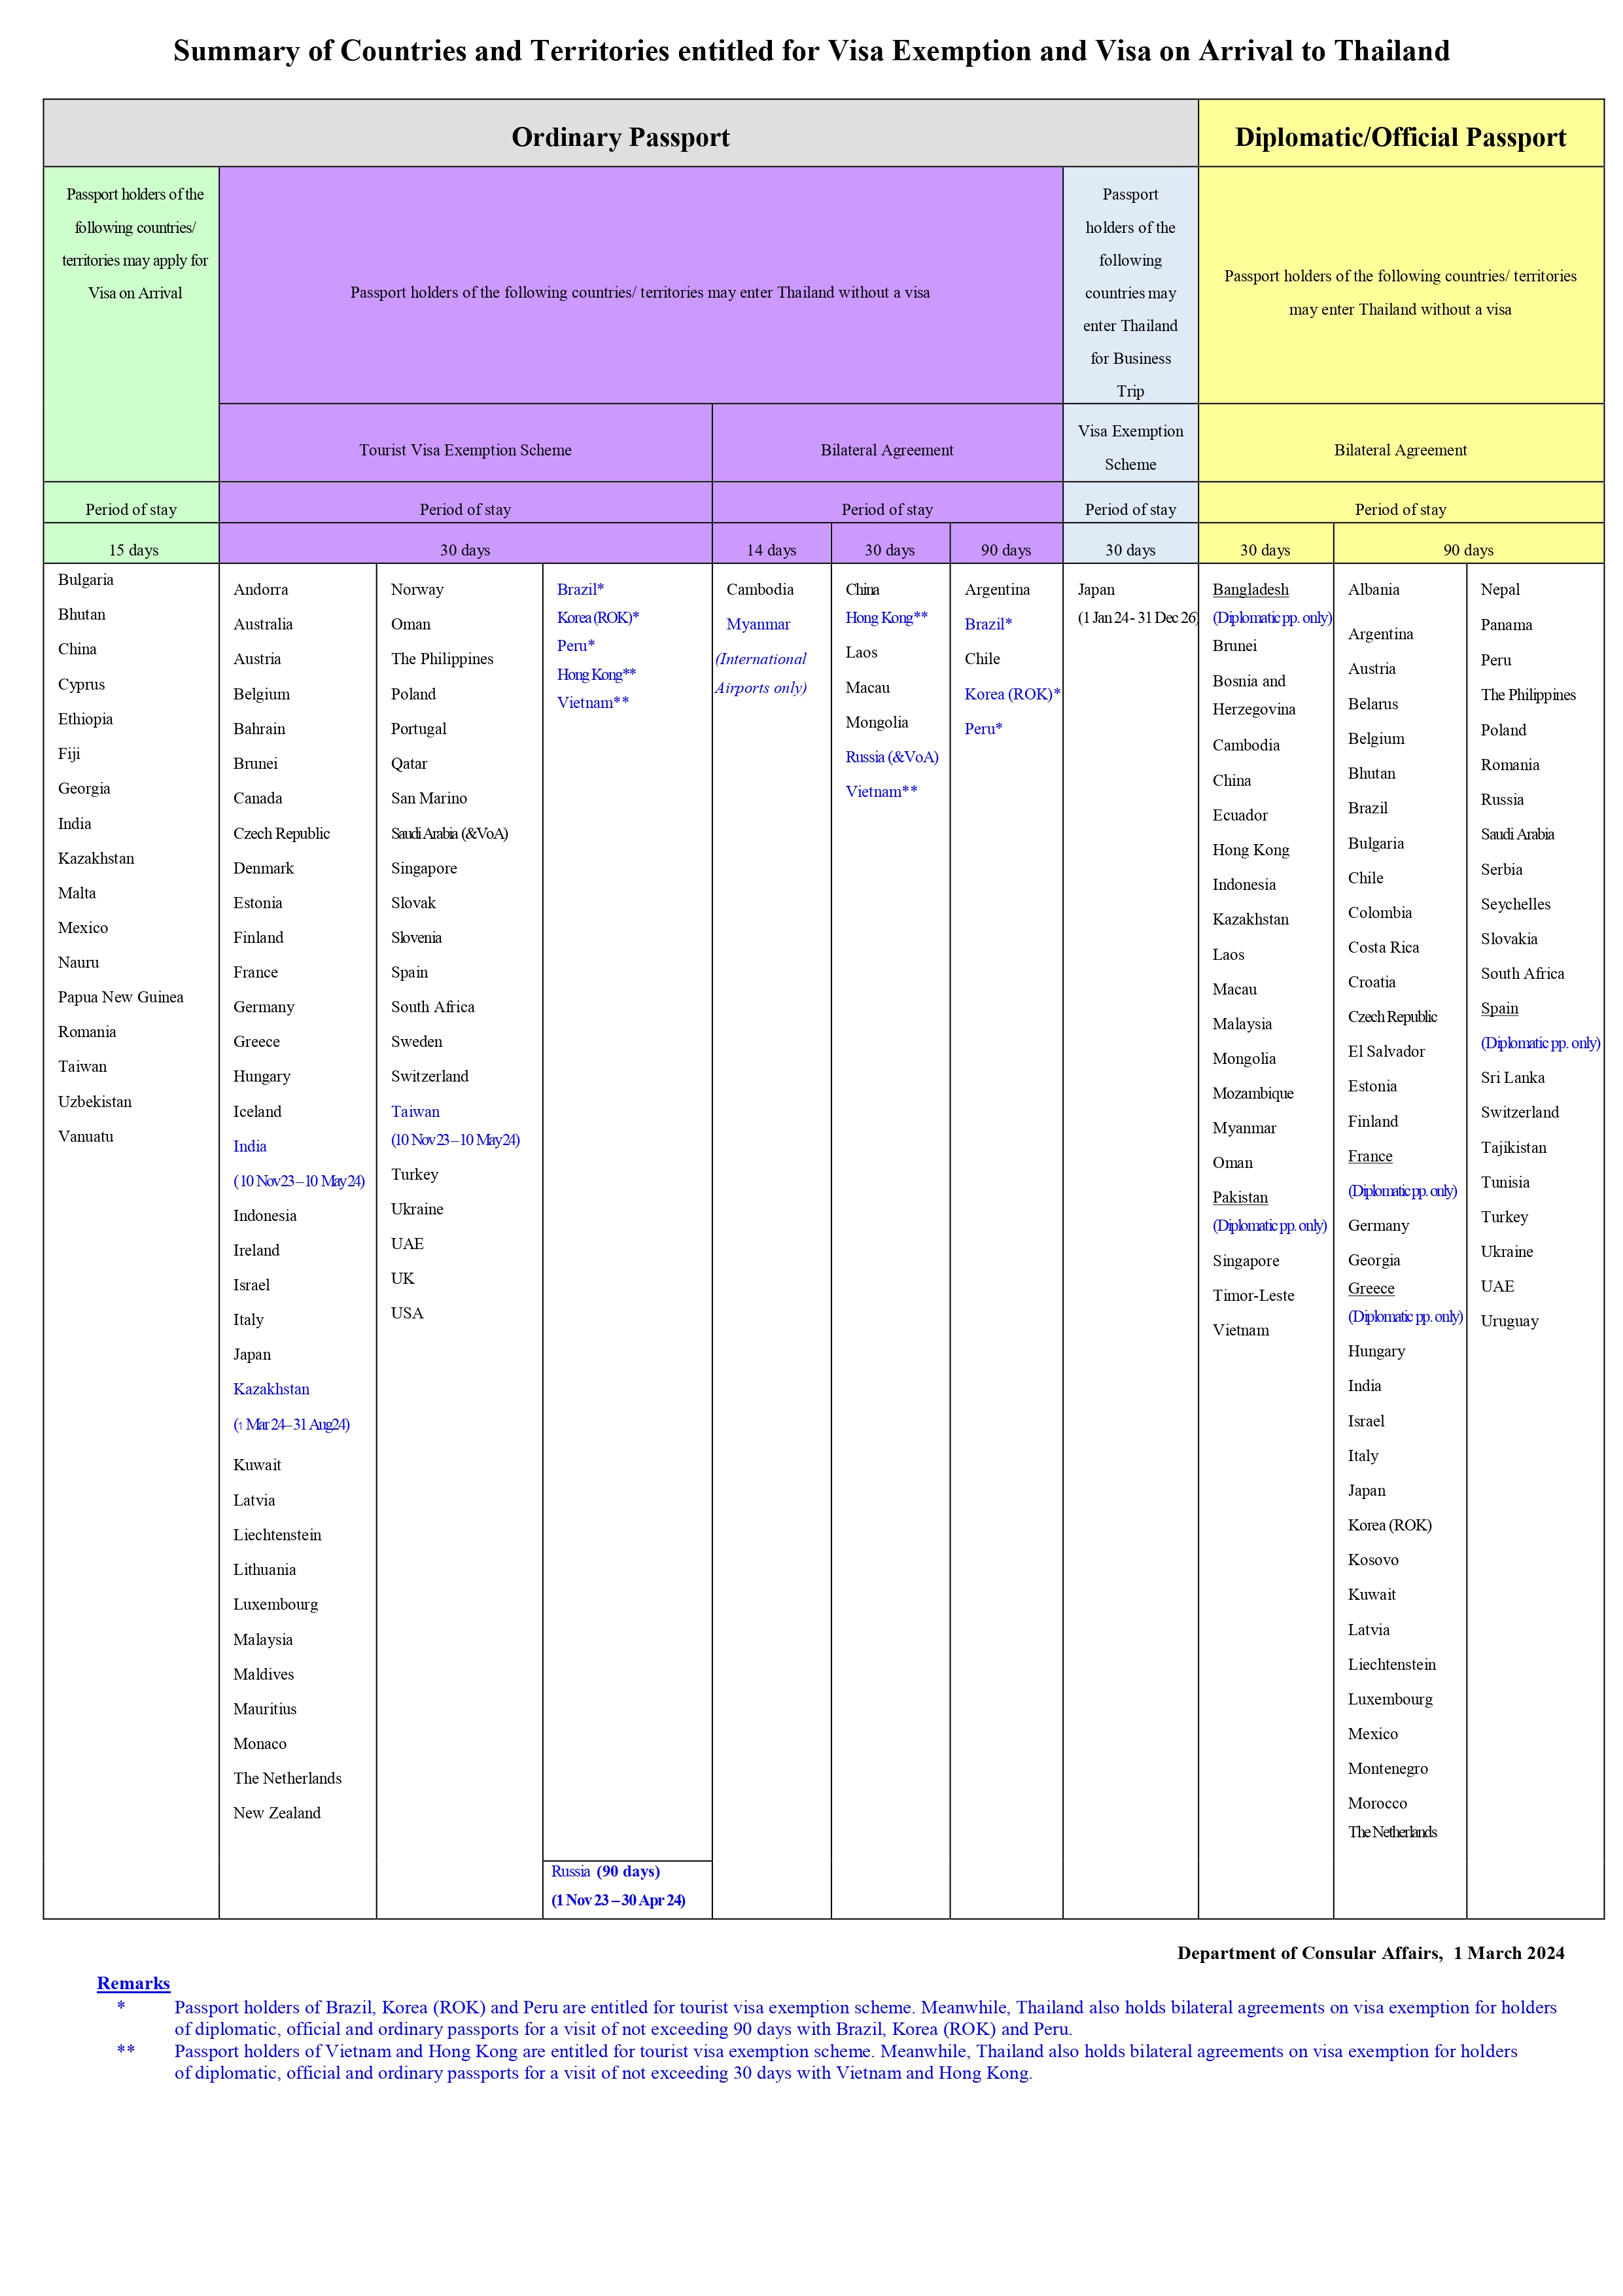 Summary_of_Countries_for_Visa_Exemption_and_VOA_march_1_2024_page-0001_1